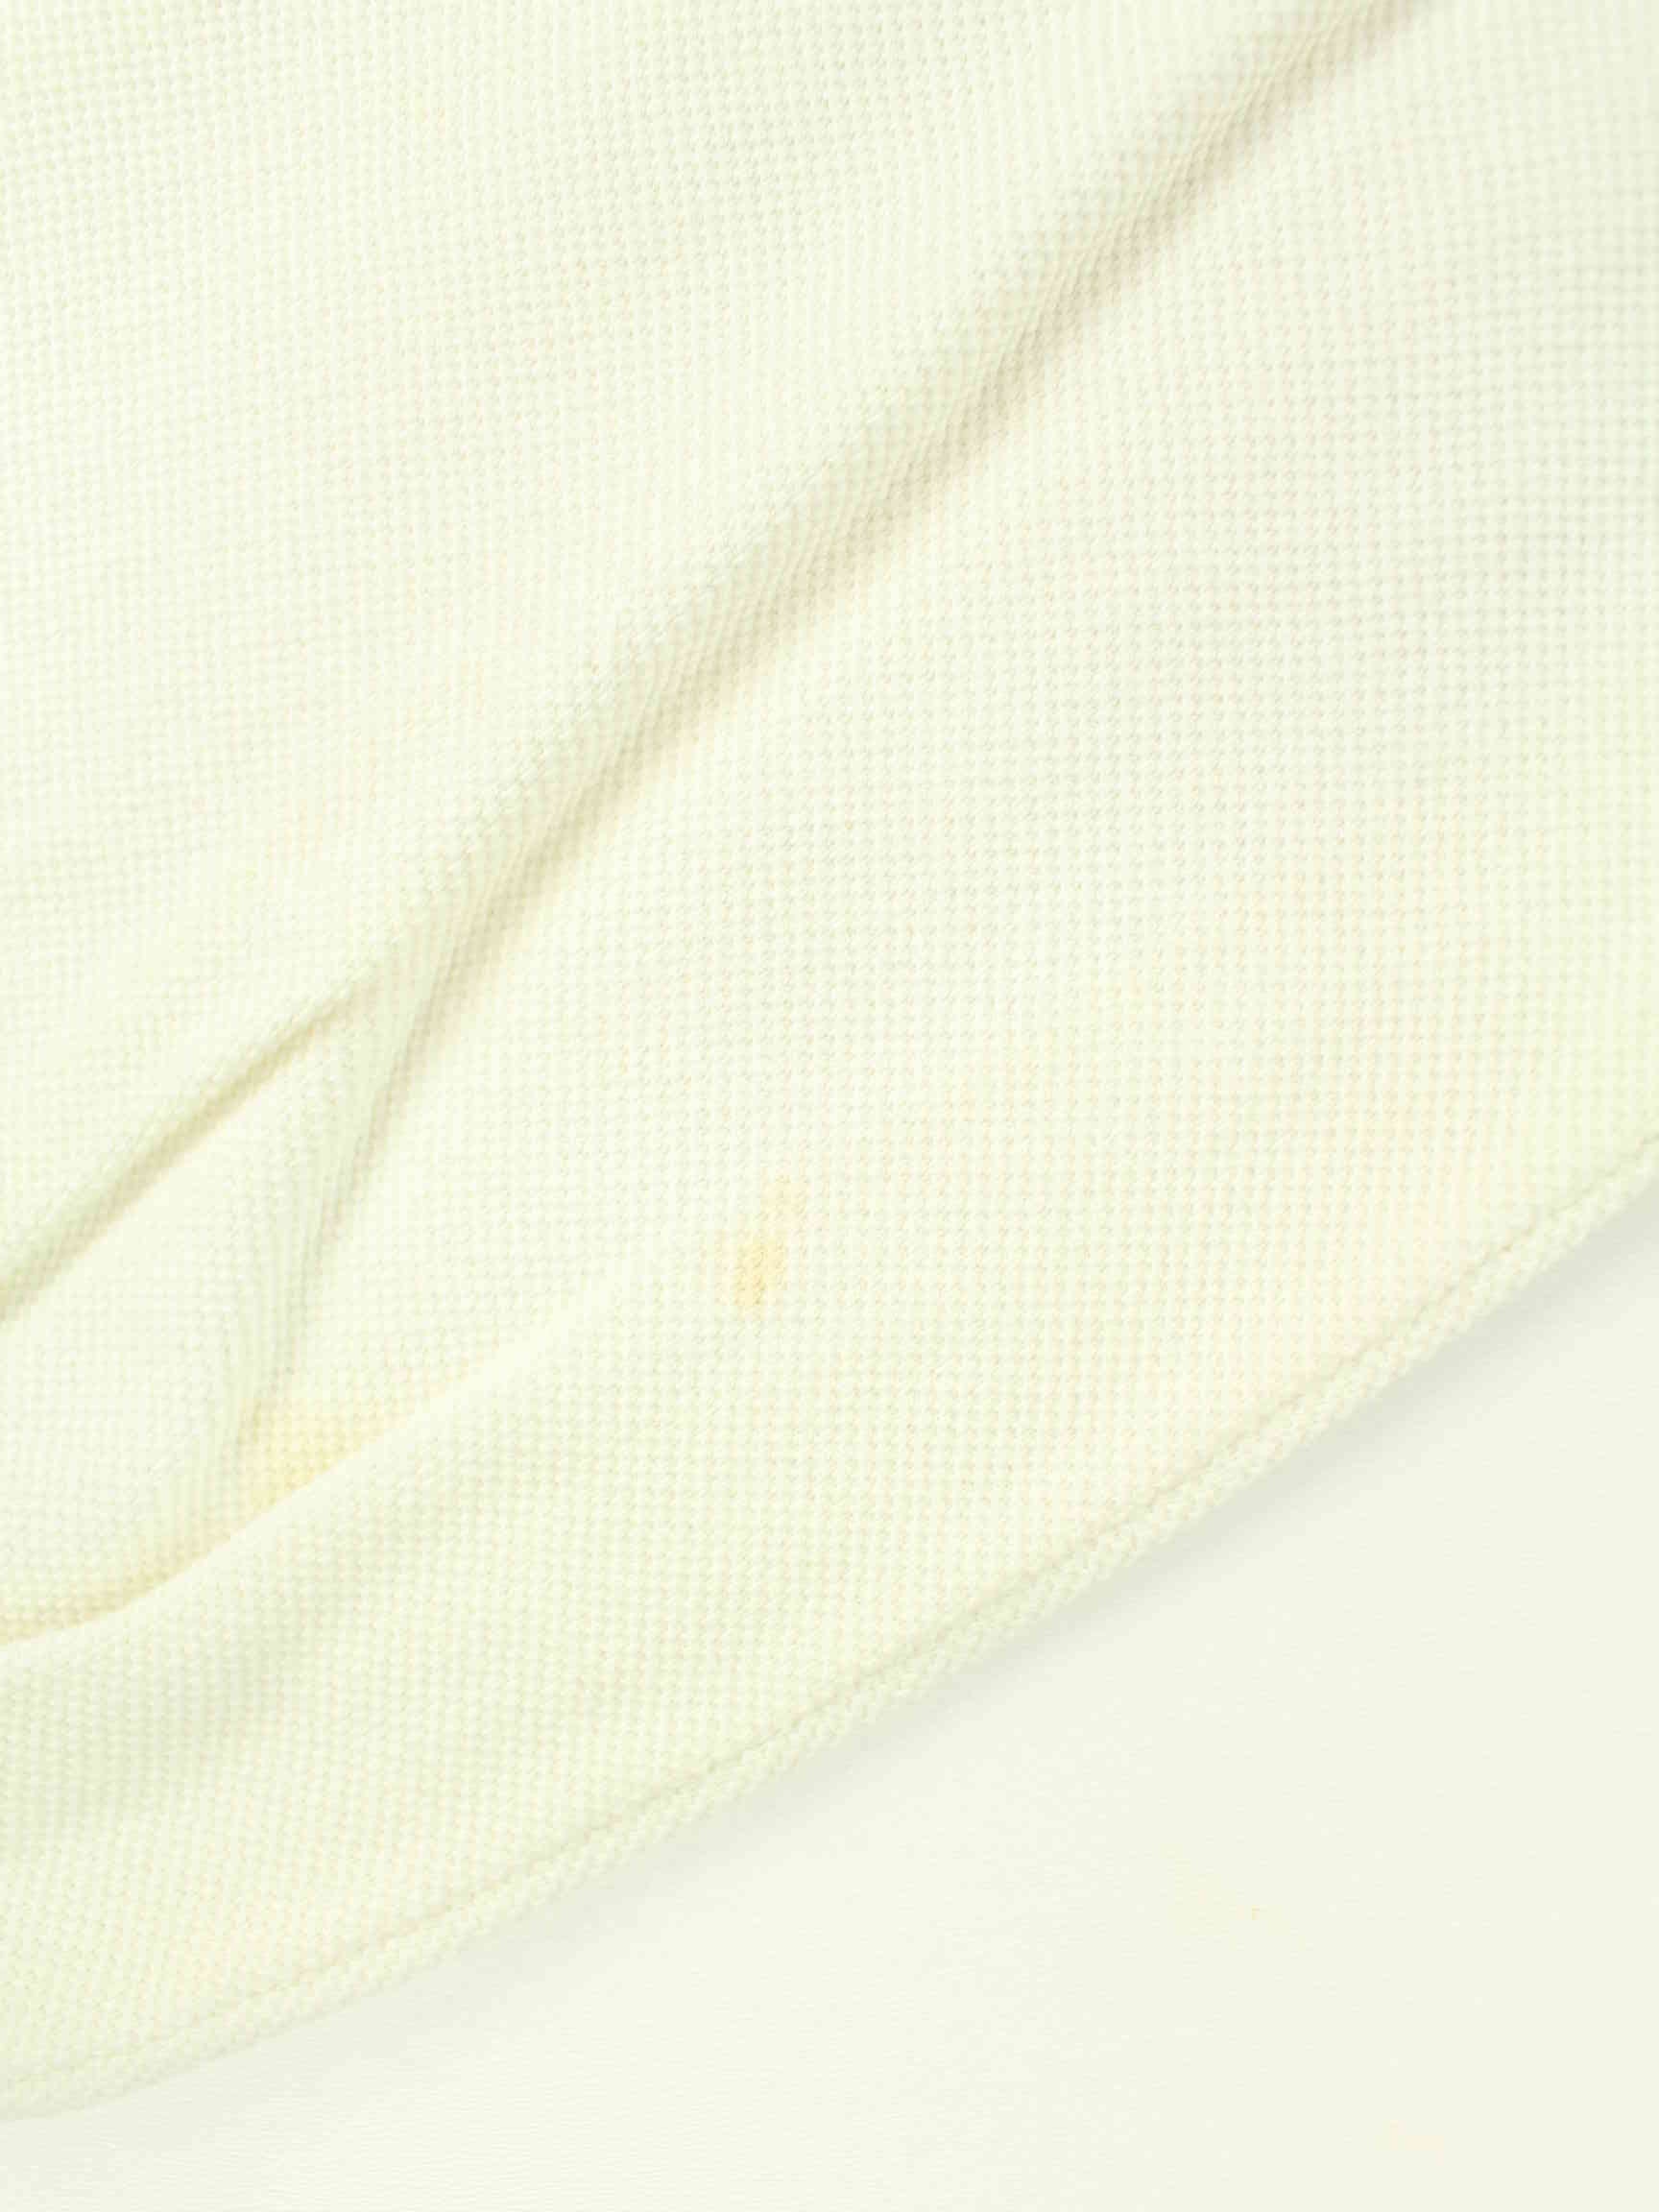 Lacoste 90s Vintage Polo Sweater Beige M (detail image 7)